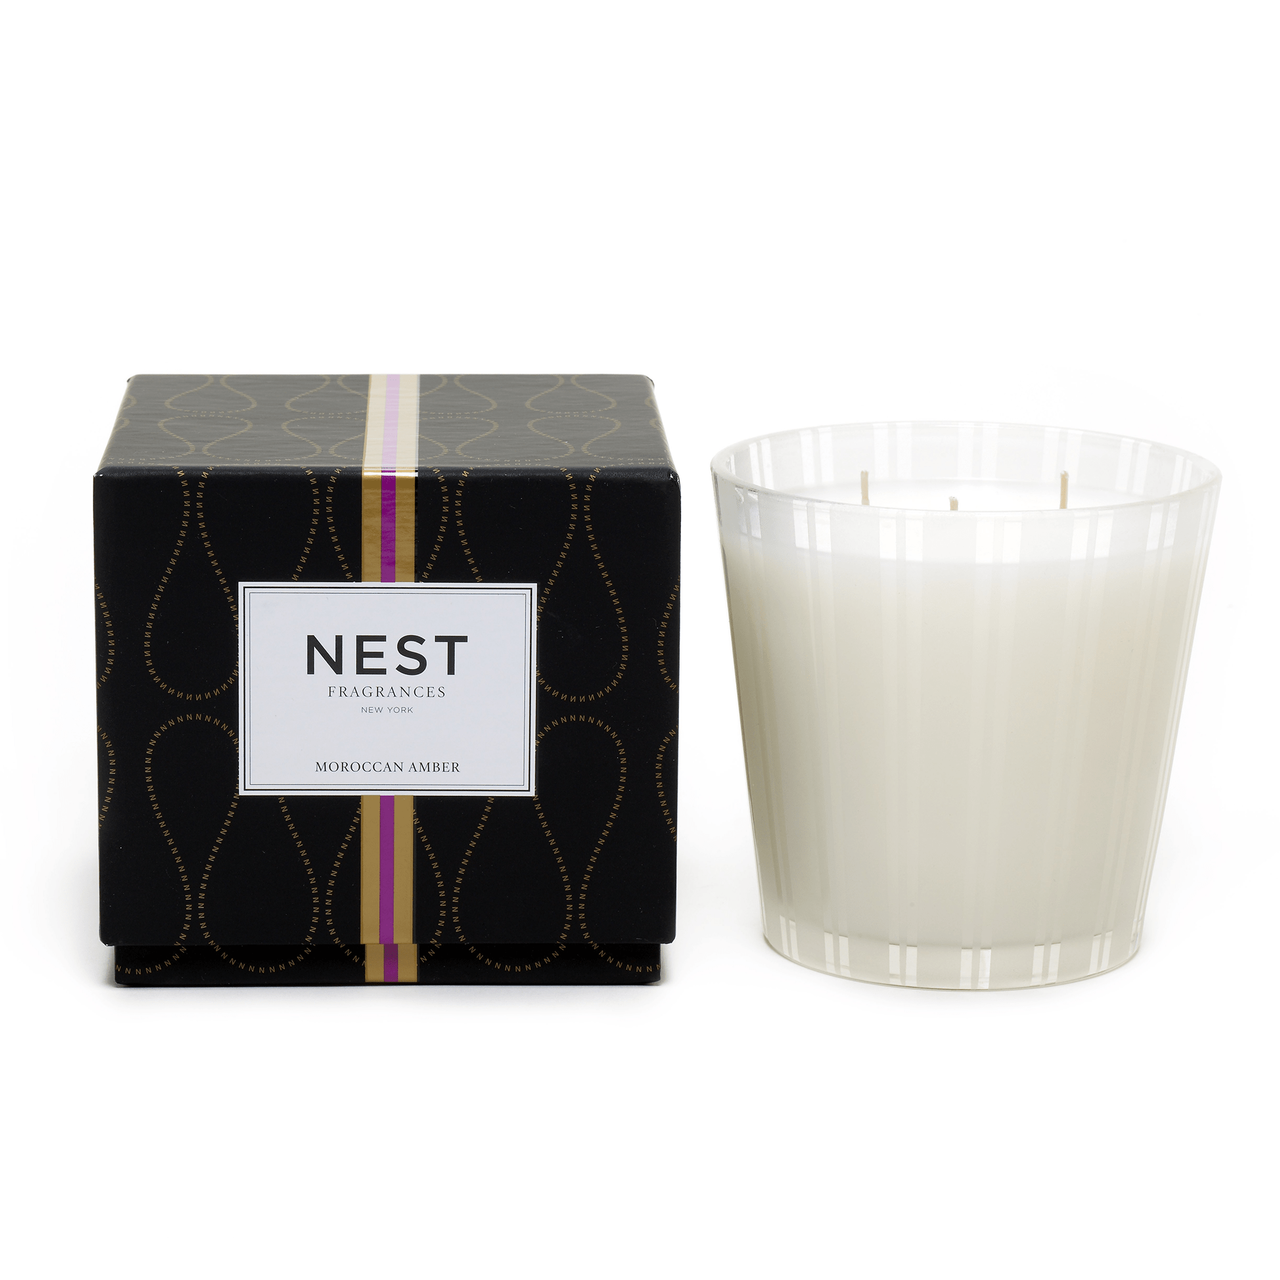 Nest Fragrances Moroccan Amber 3-Wick Candle